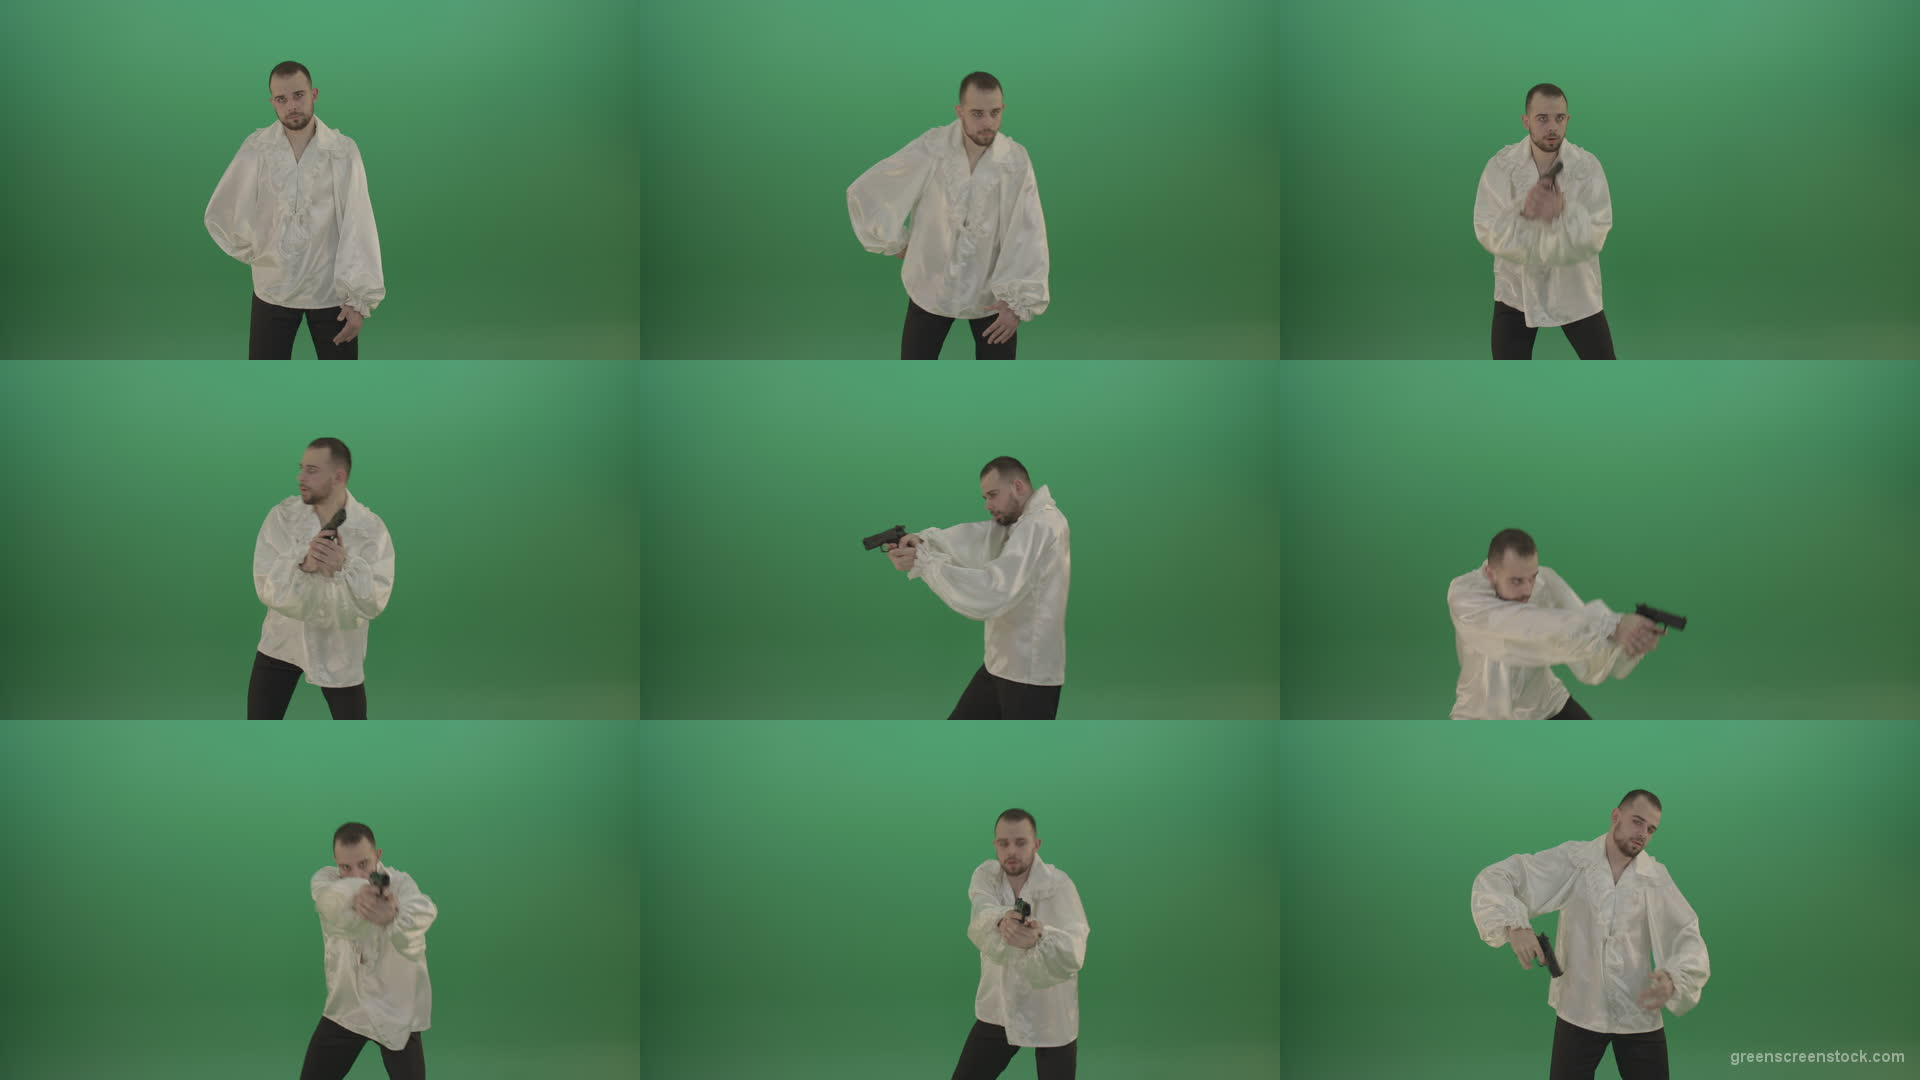 Man-in-white-shirt-shooting-with-pistol-hand-gun-isolated-in-green-screen-studio Green Screen Stock